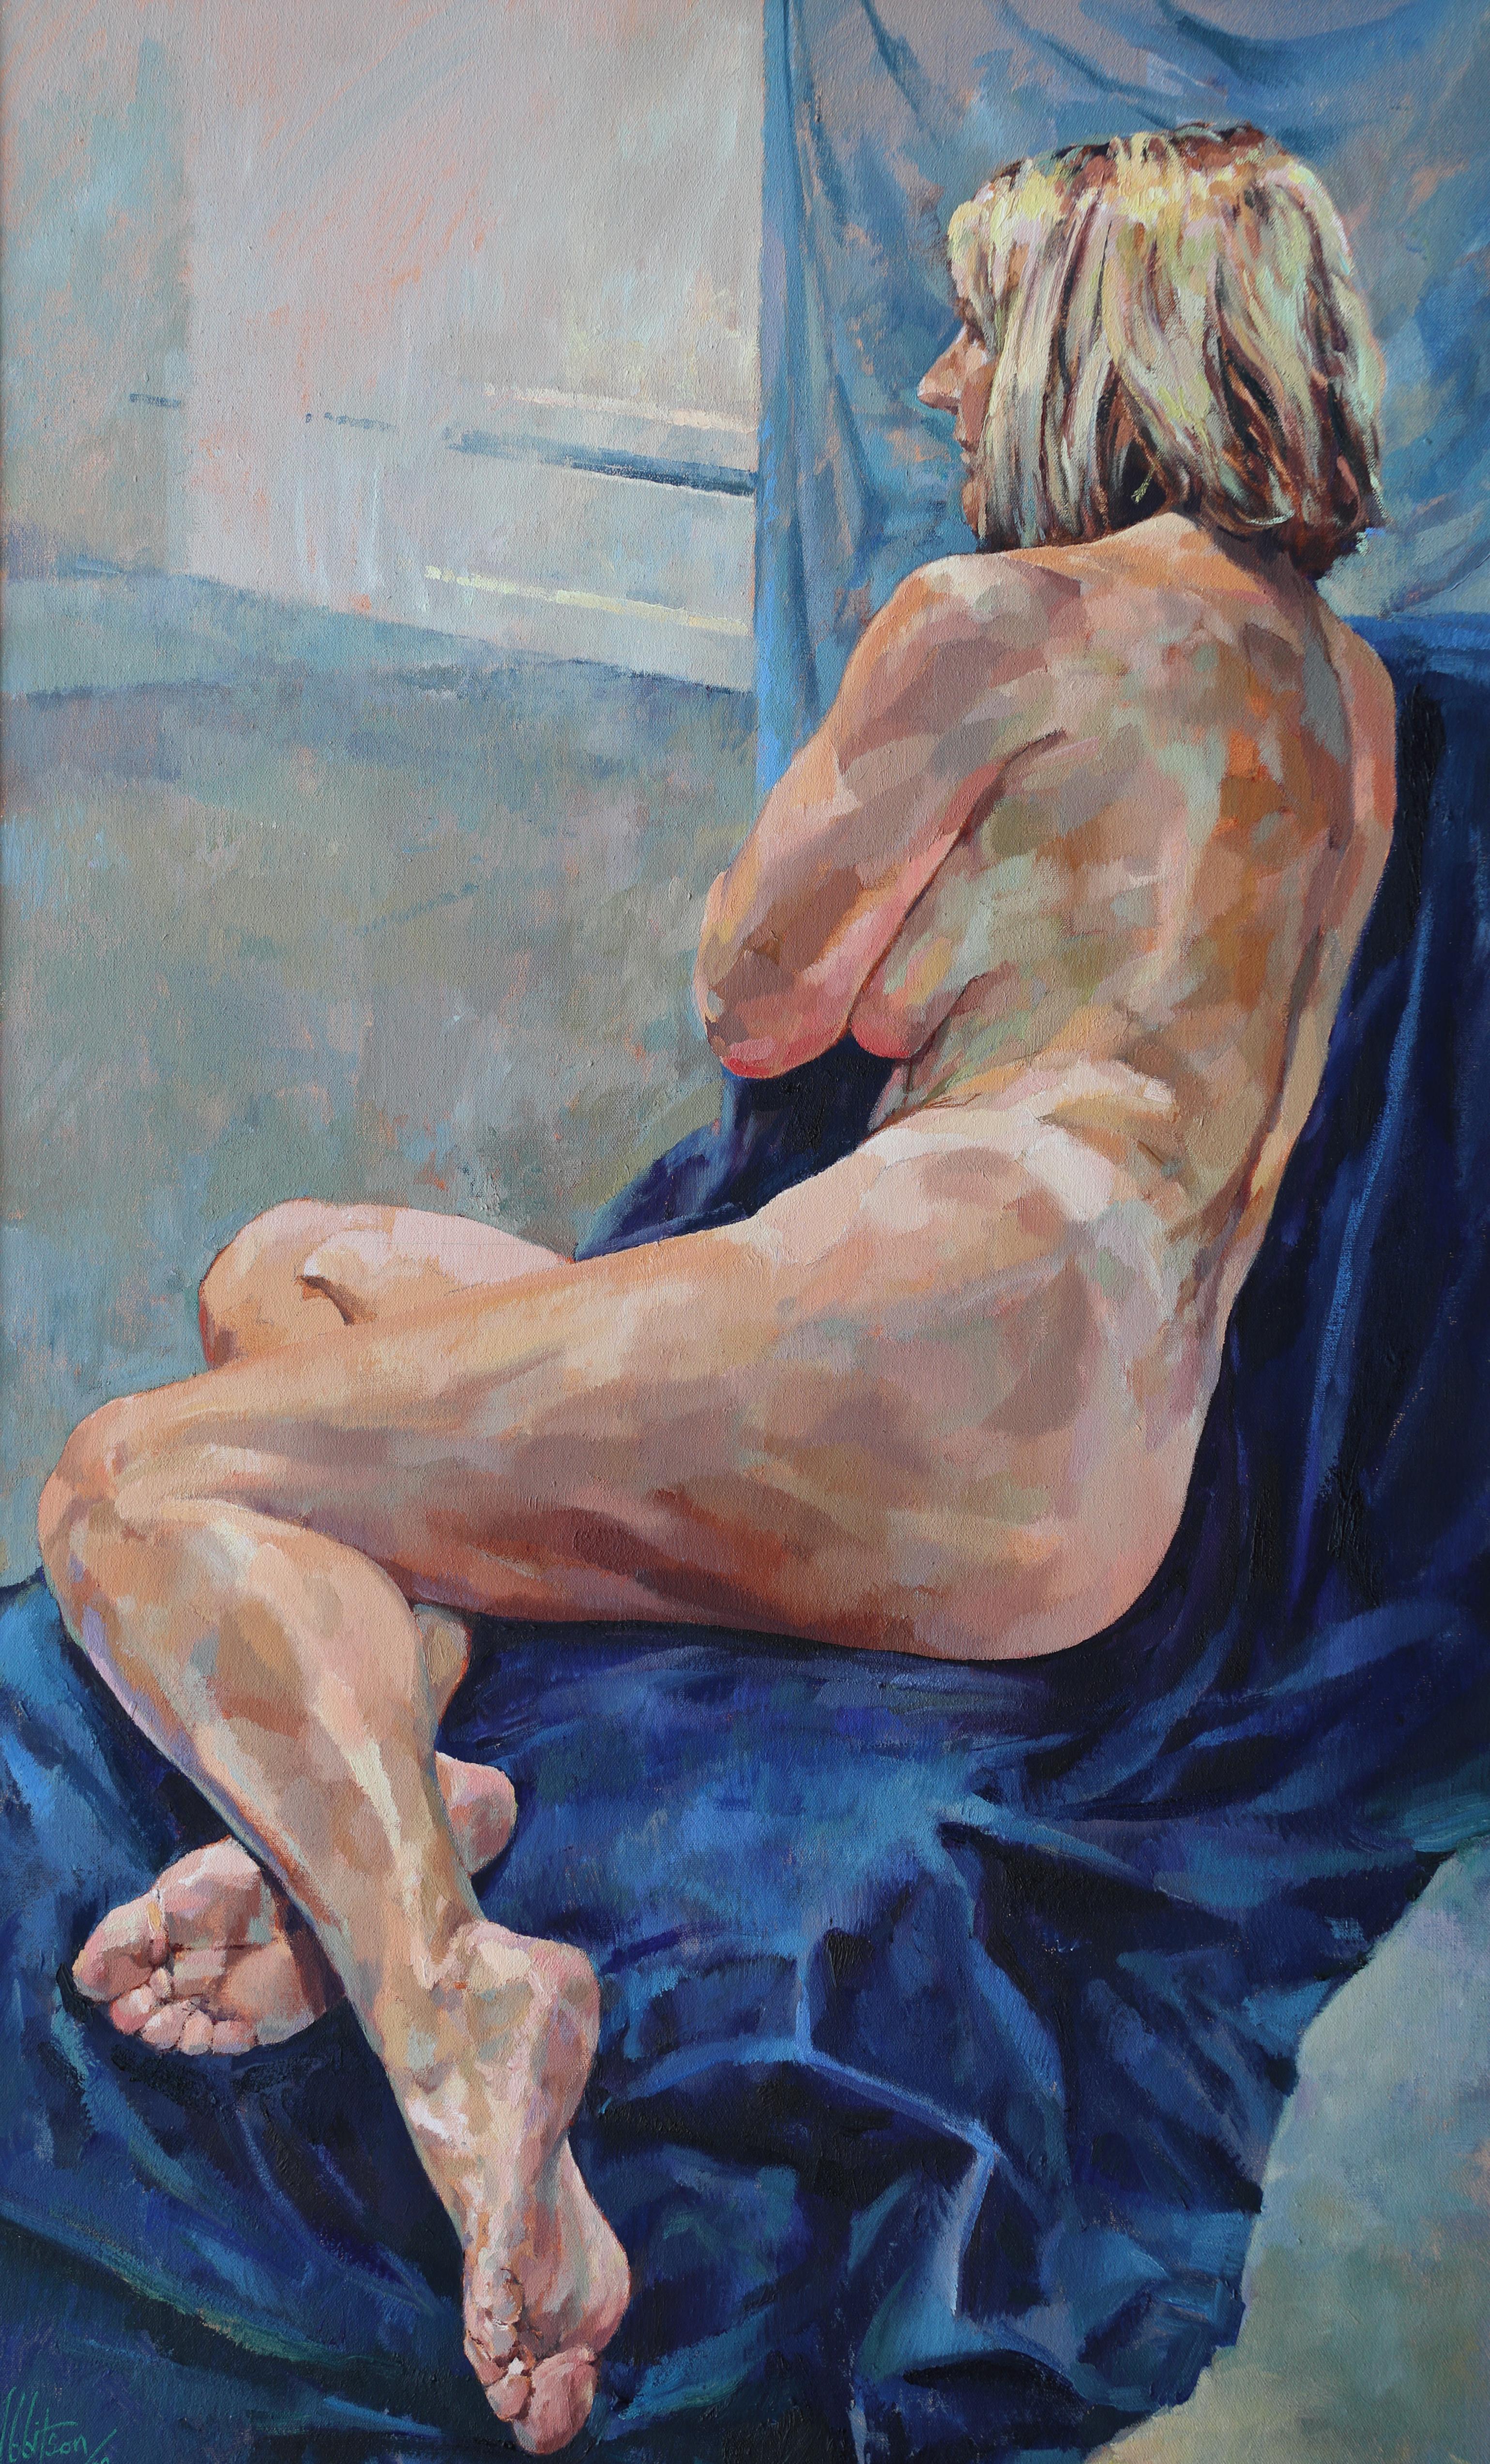 Glenn Ibbitson Nude Painting - Chelsea Model. Contemporary Nude Oil Painting